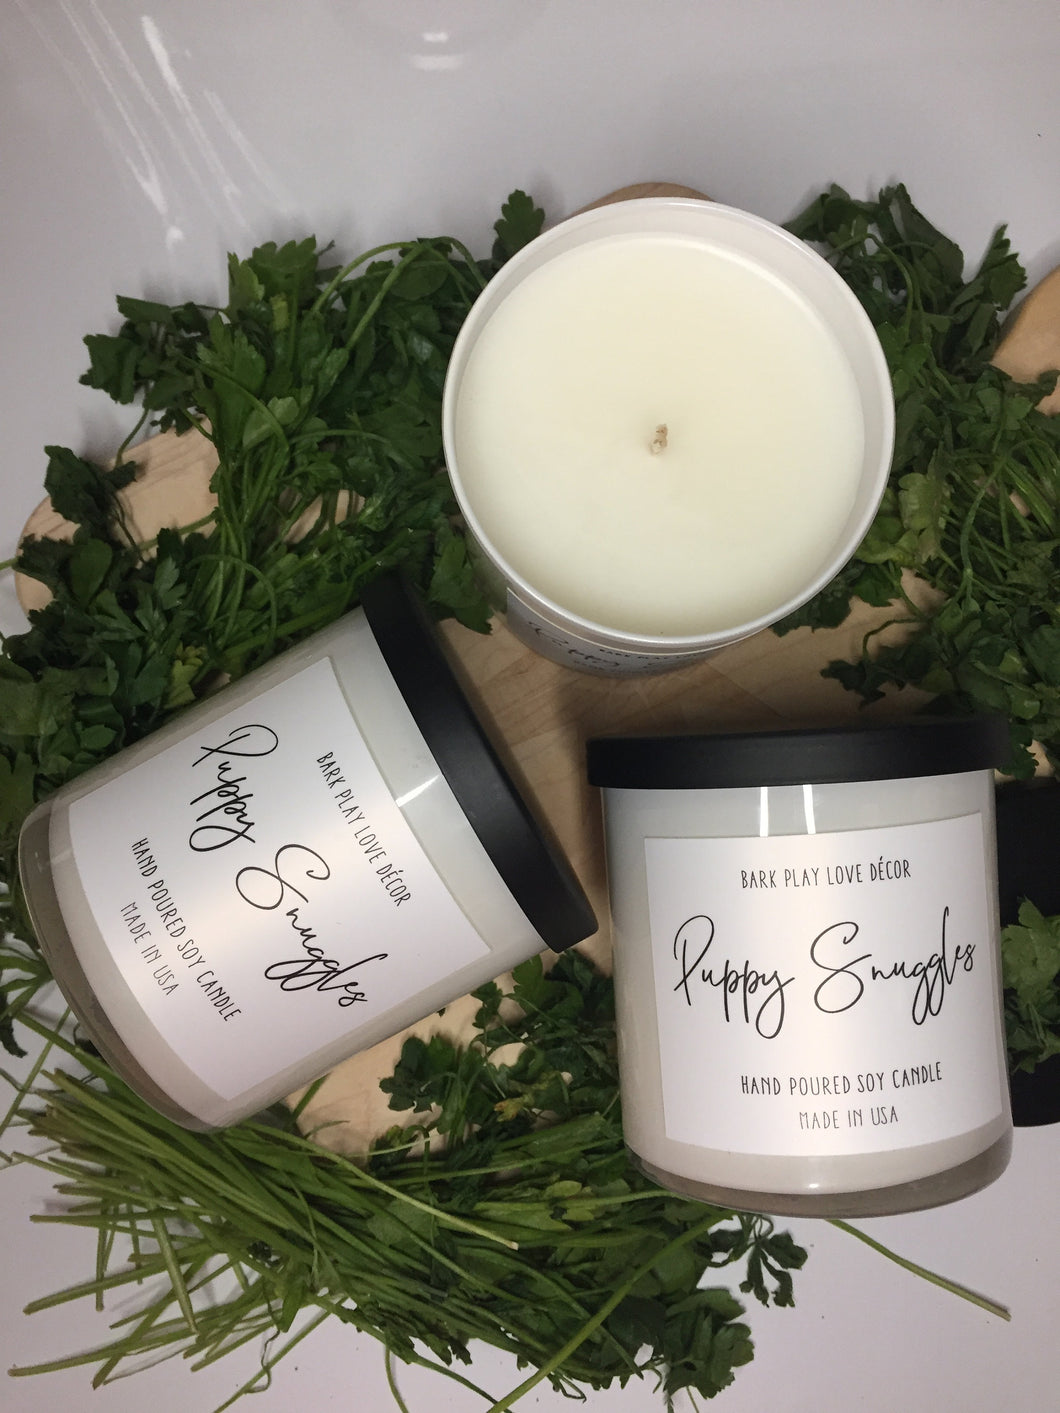 Puppy Snuggles Natural Soy Hand Poured Candle